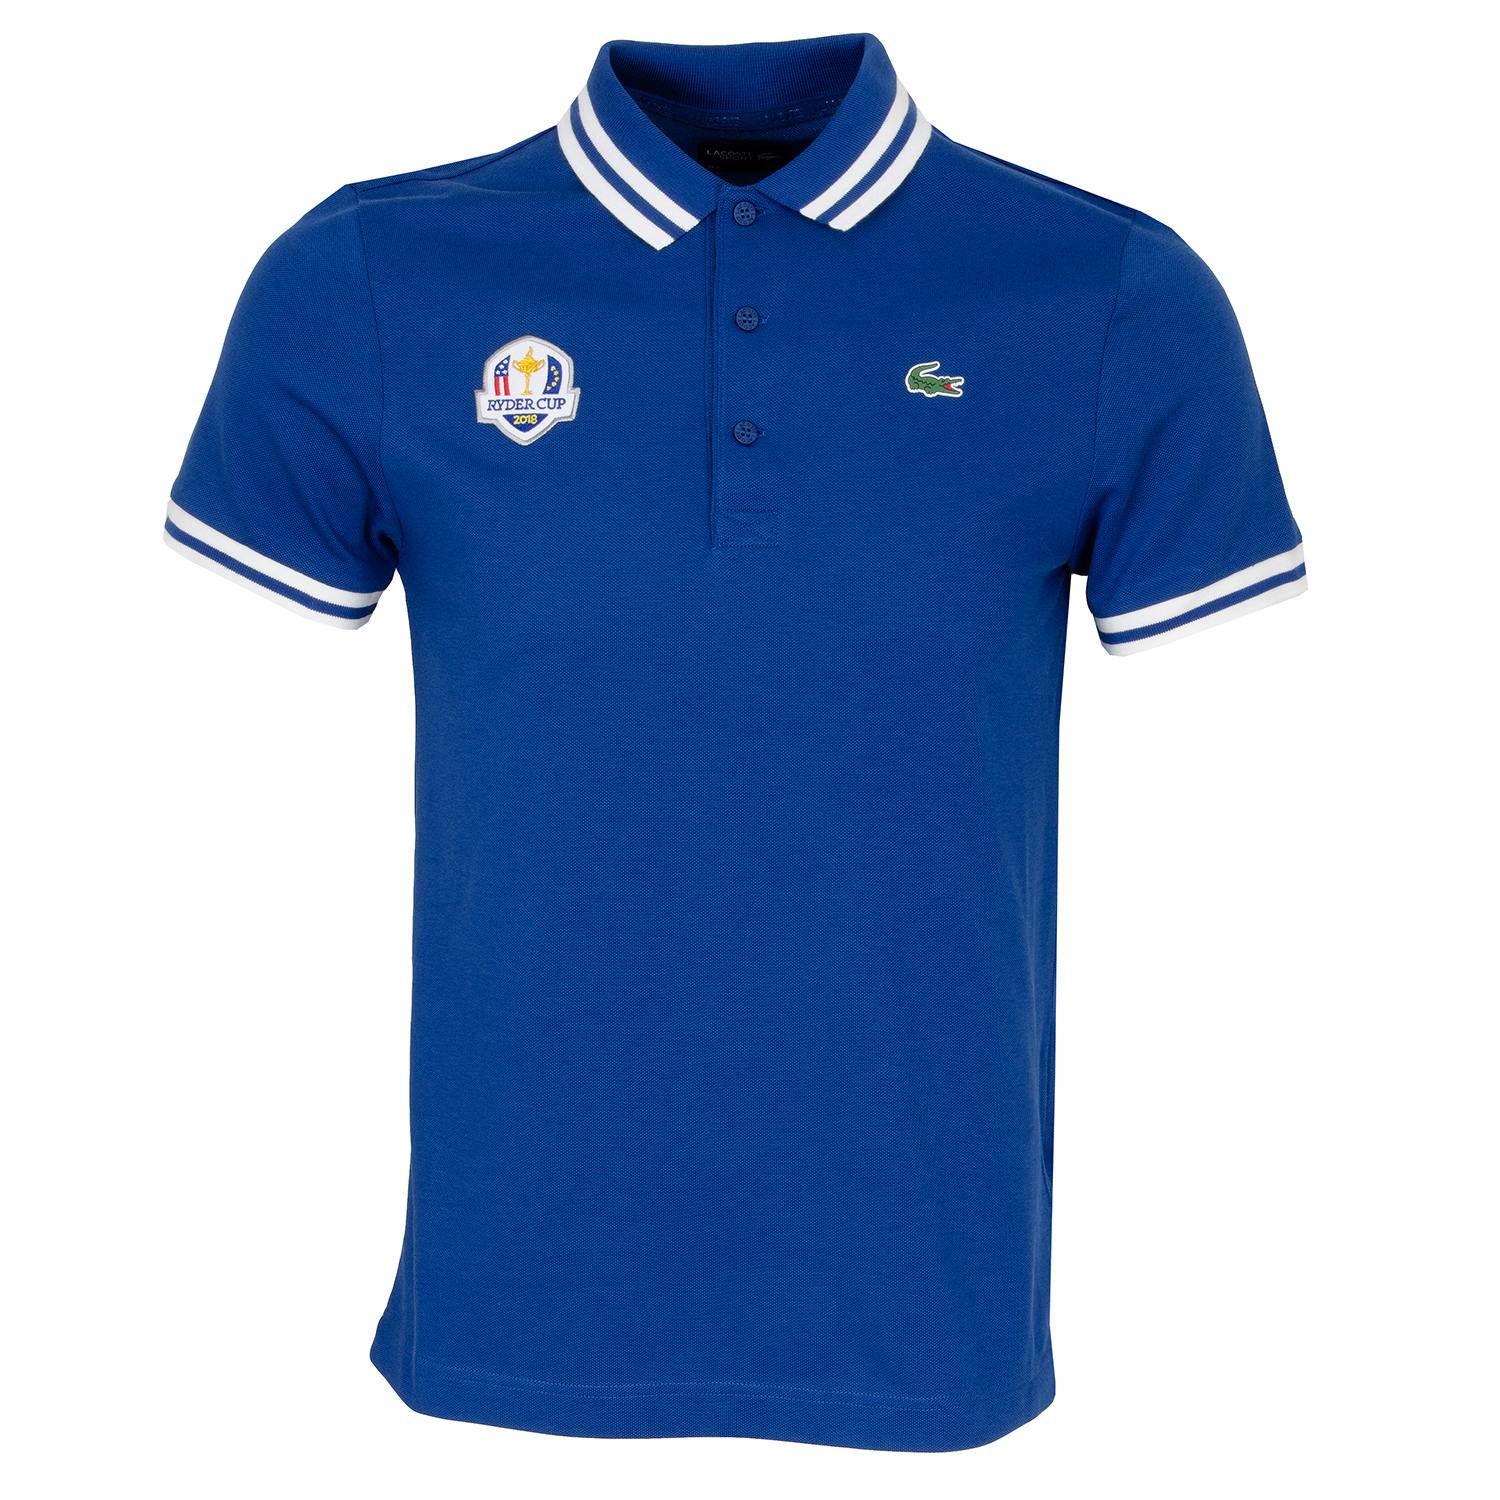 lacoste ryder cup 2018